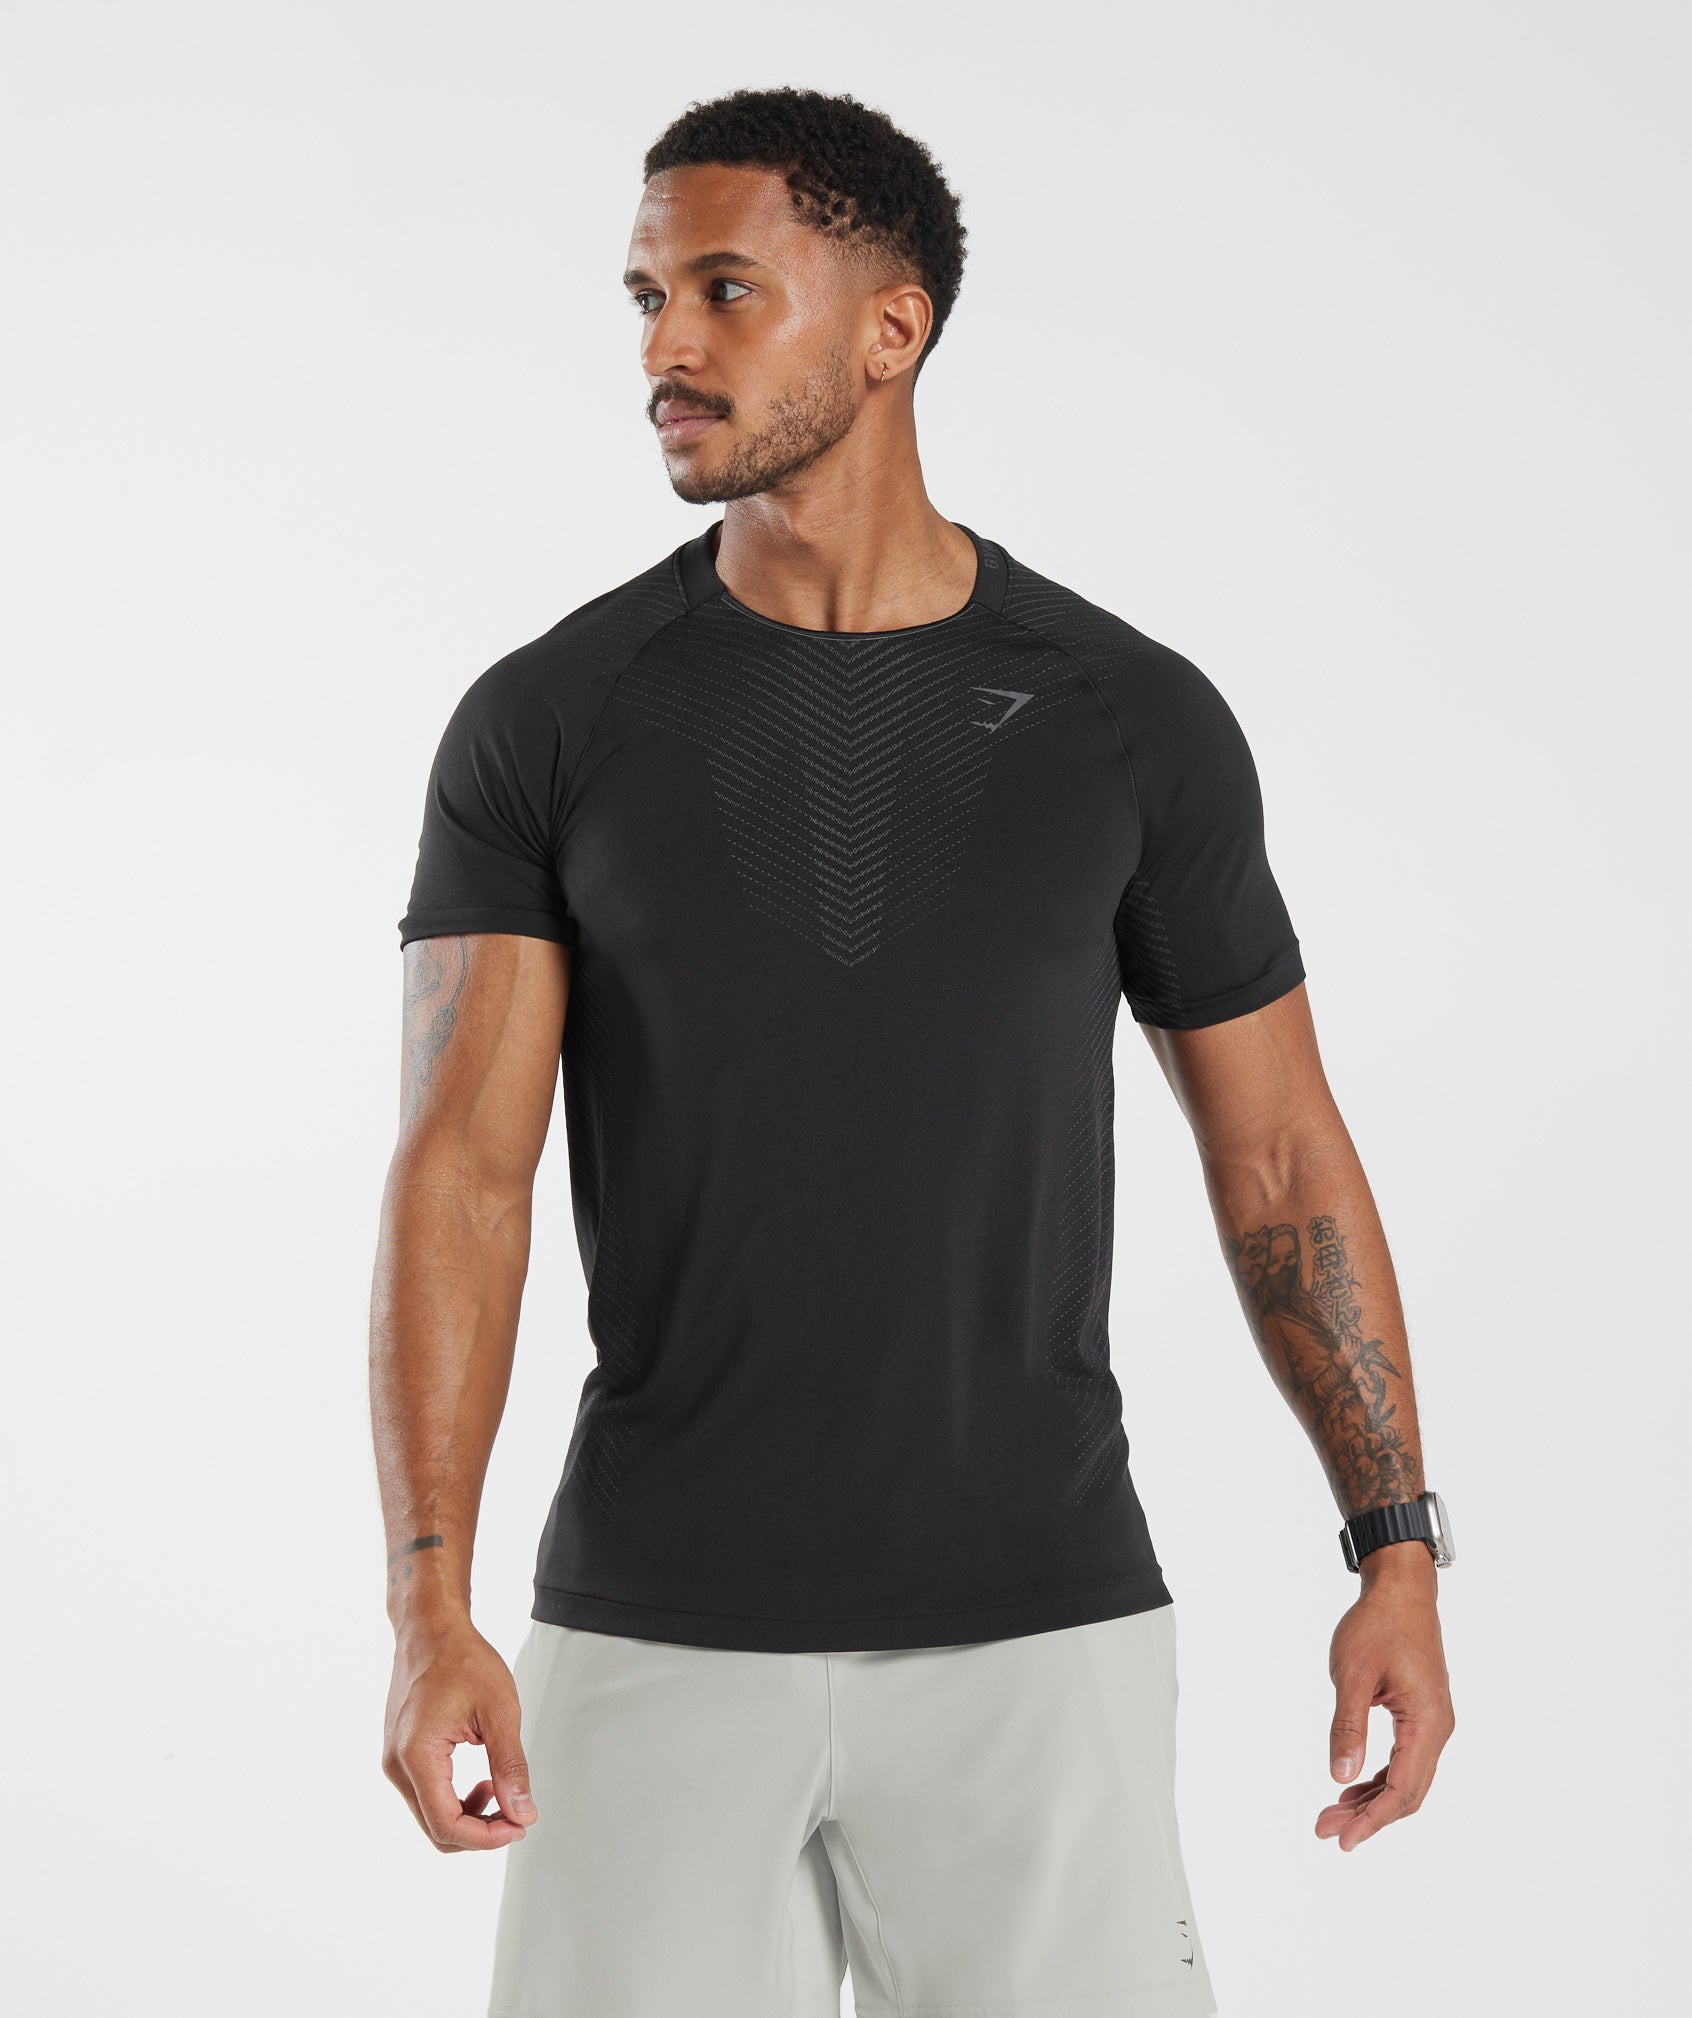 Apex Seamless T-Shirt in Black/Silhouette Grey - view 1